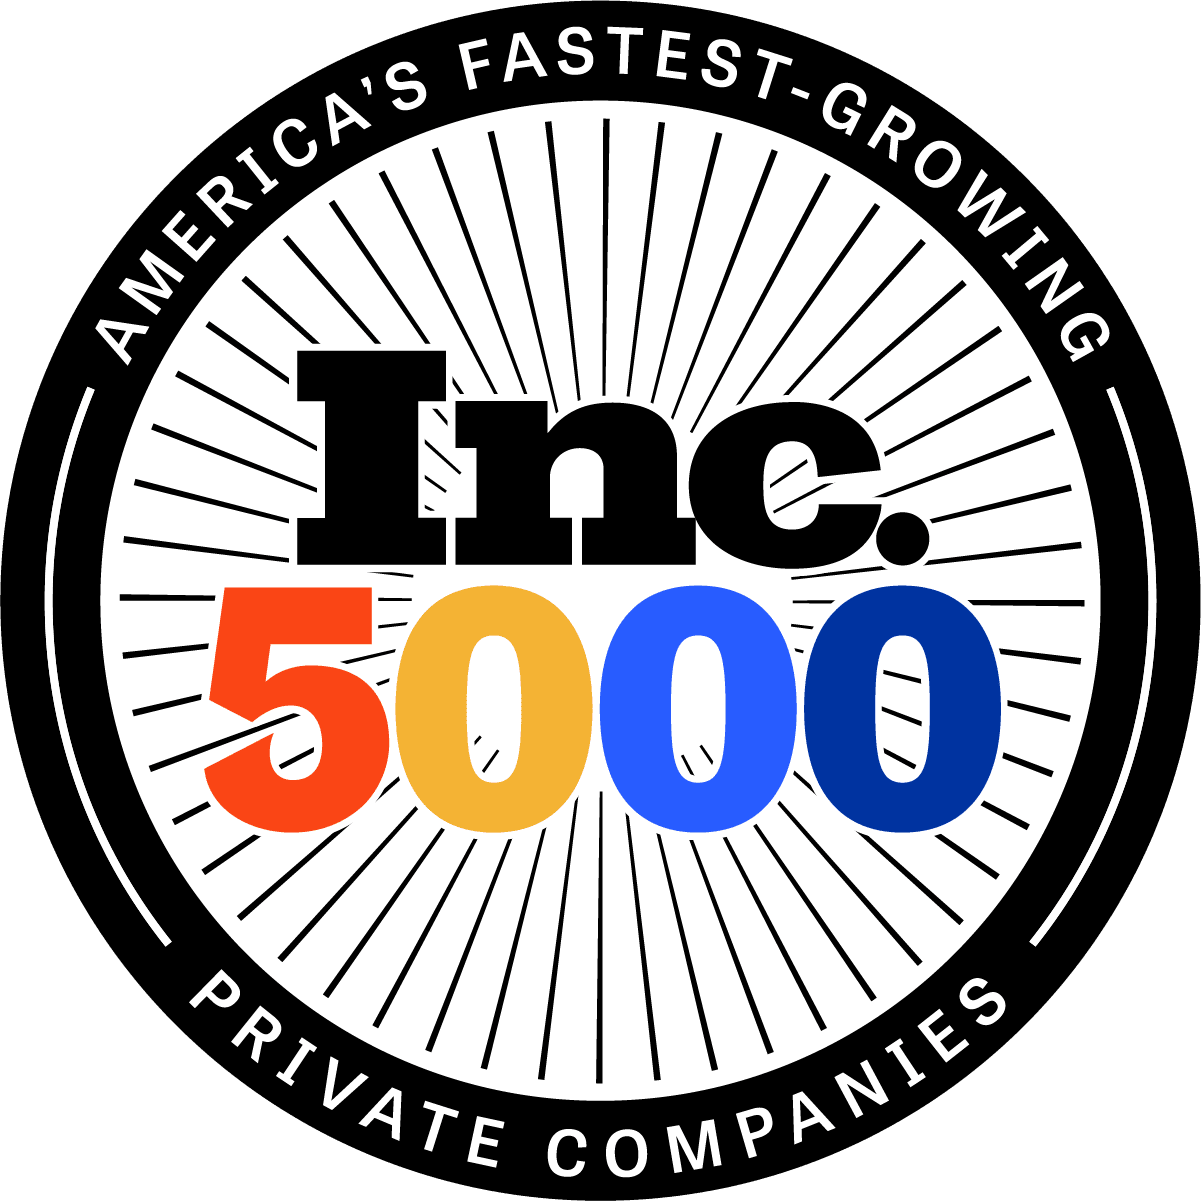 Gama Sonic was named one of the U.S.'s fastest-growing private companies by Inc. 5000.